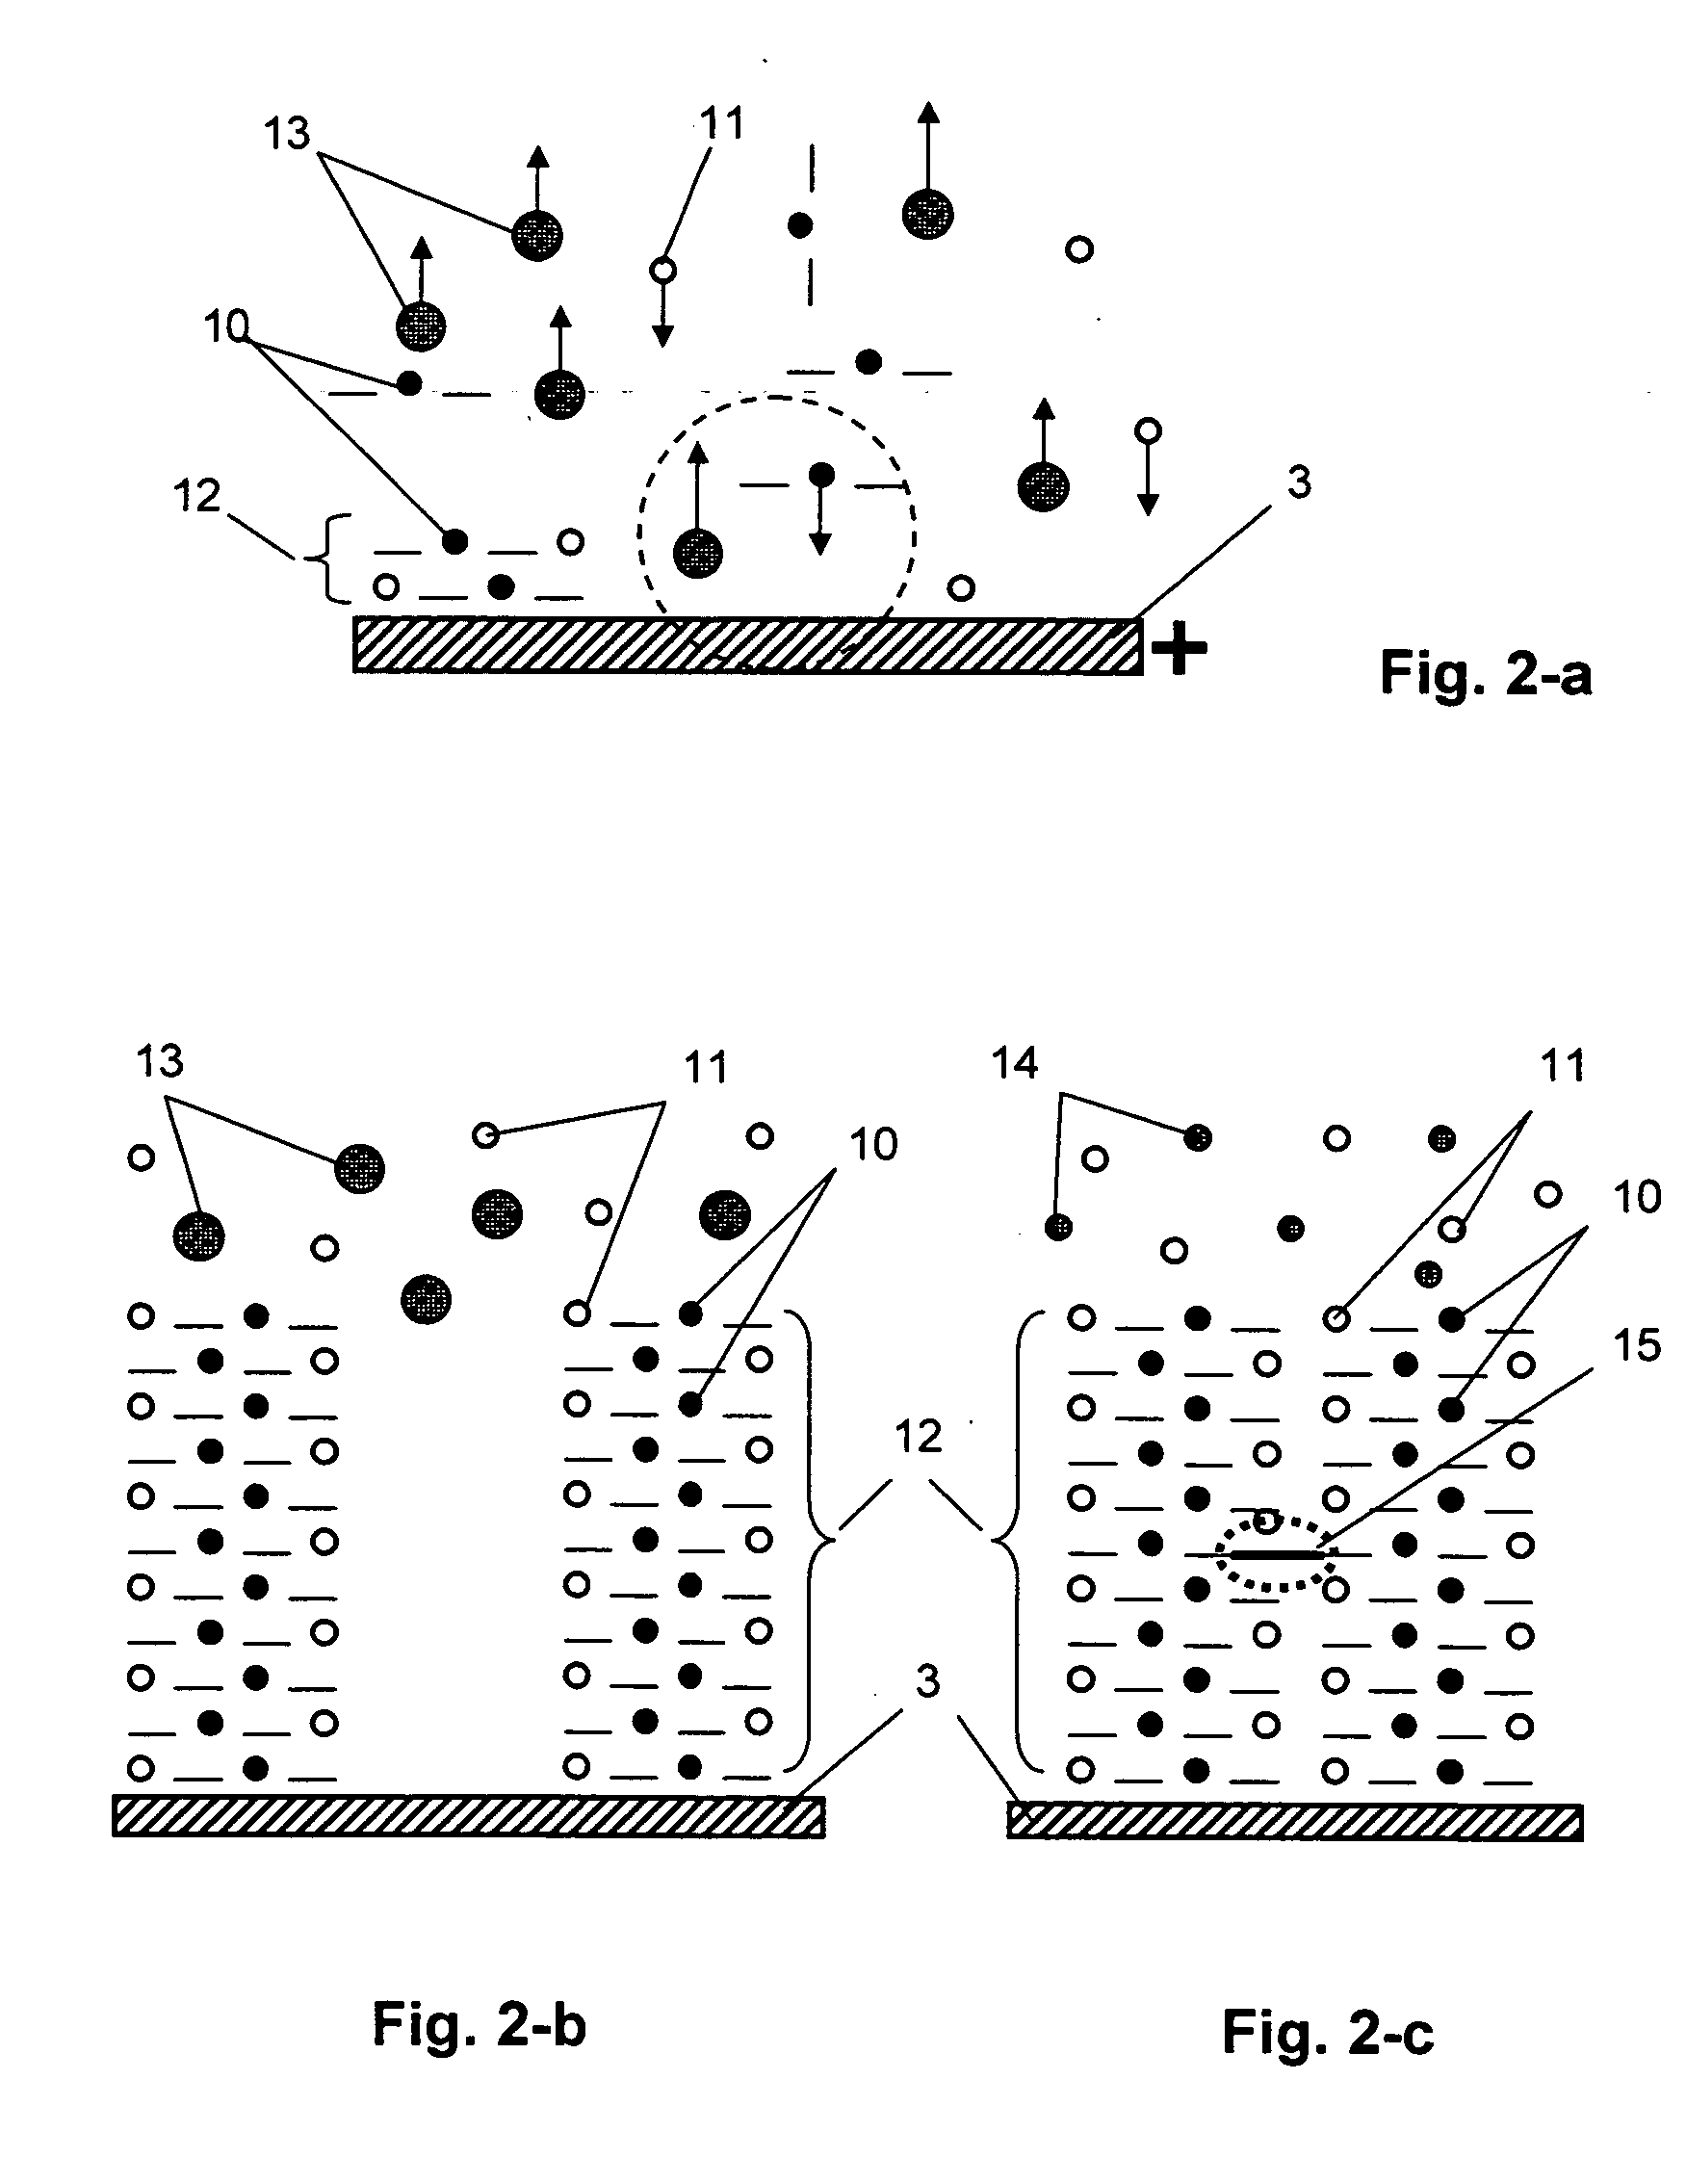 Method of manufacture of an electrode for electrochemical devices